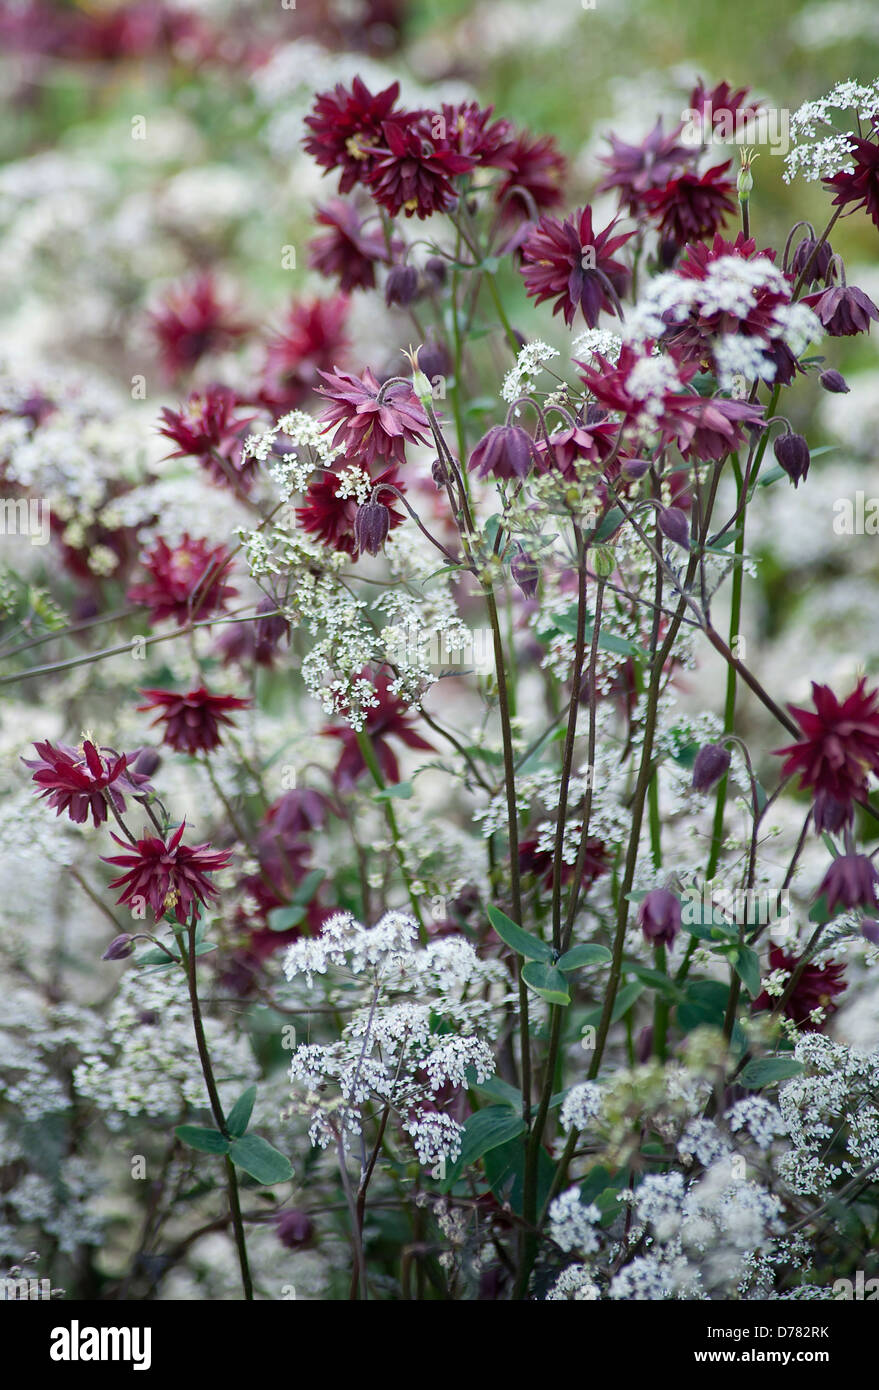 Aquilegia vulgaris 'Nora Barlow' growing amongst umbels of small, white flowers of Anthriscus sylvestris, cow parsley. Stock Photo